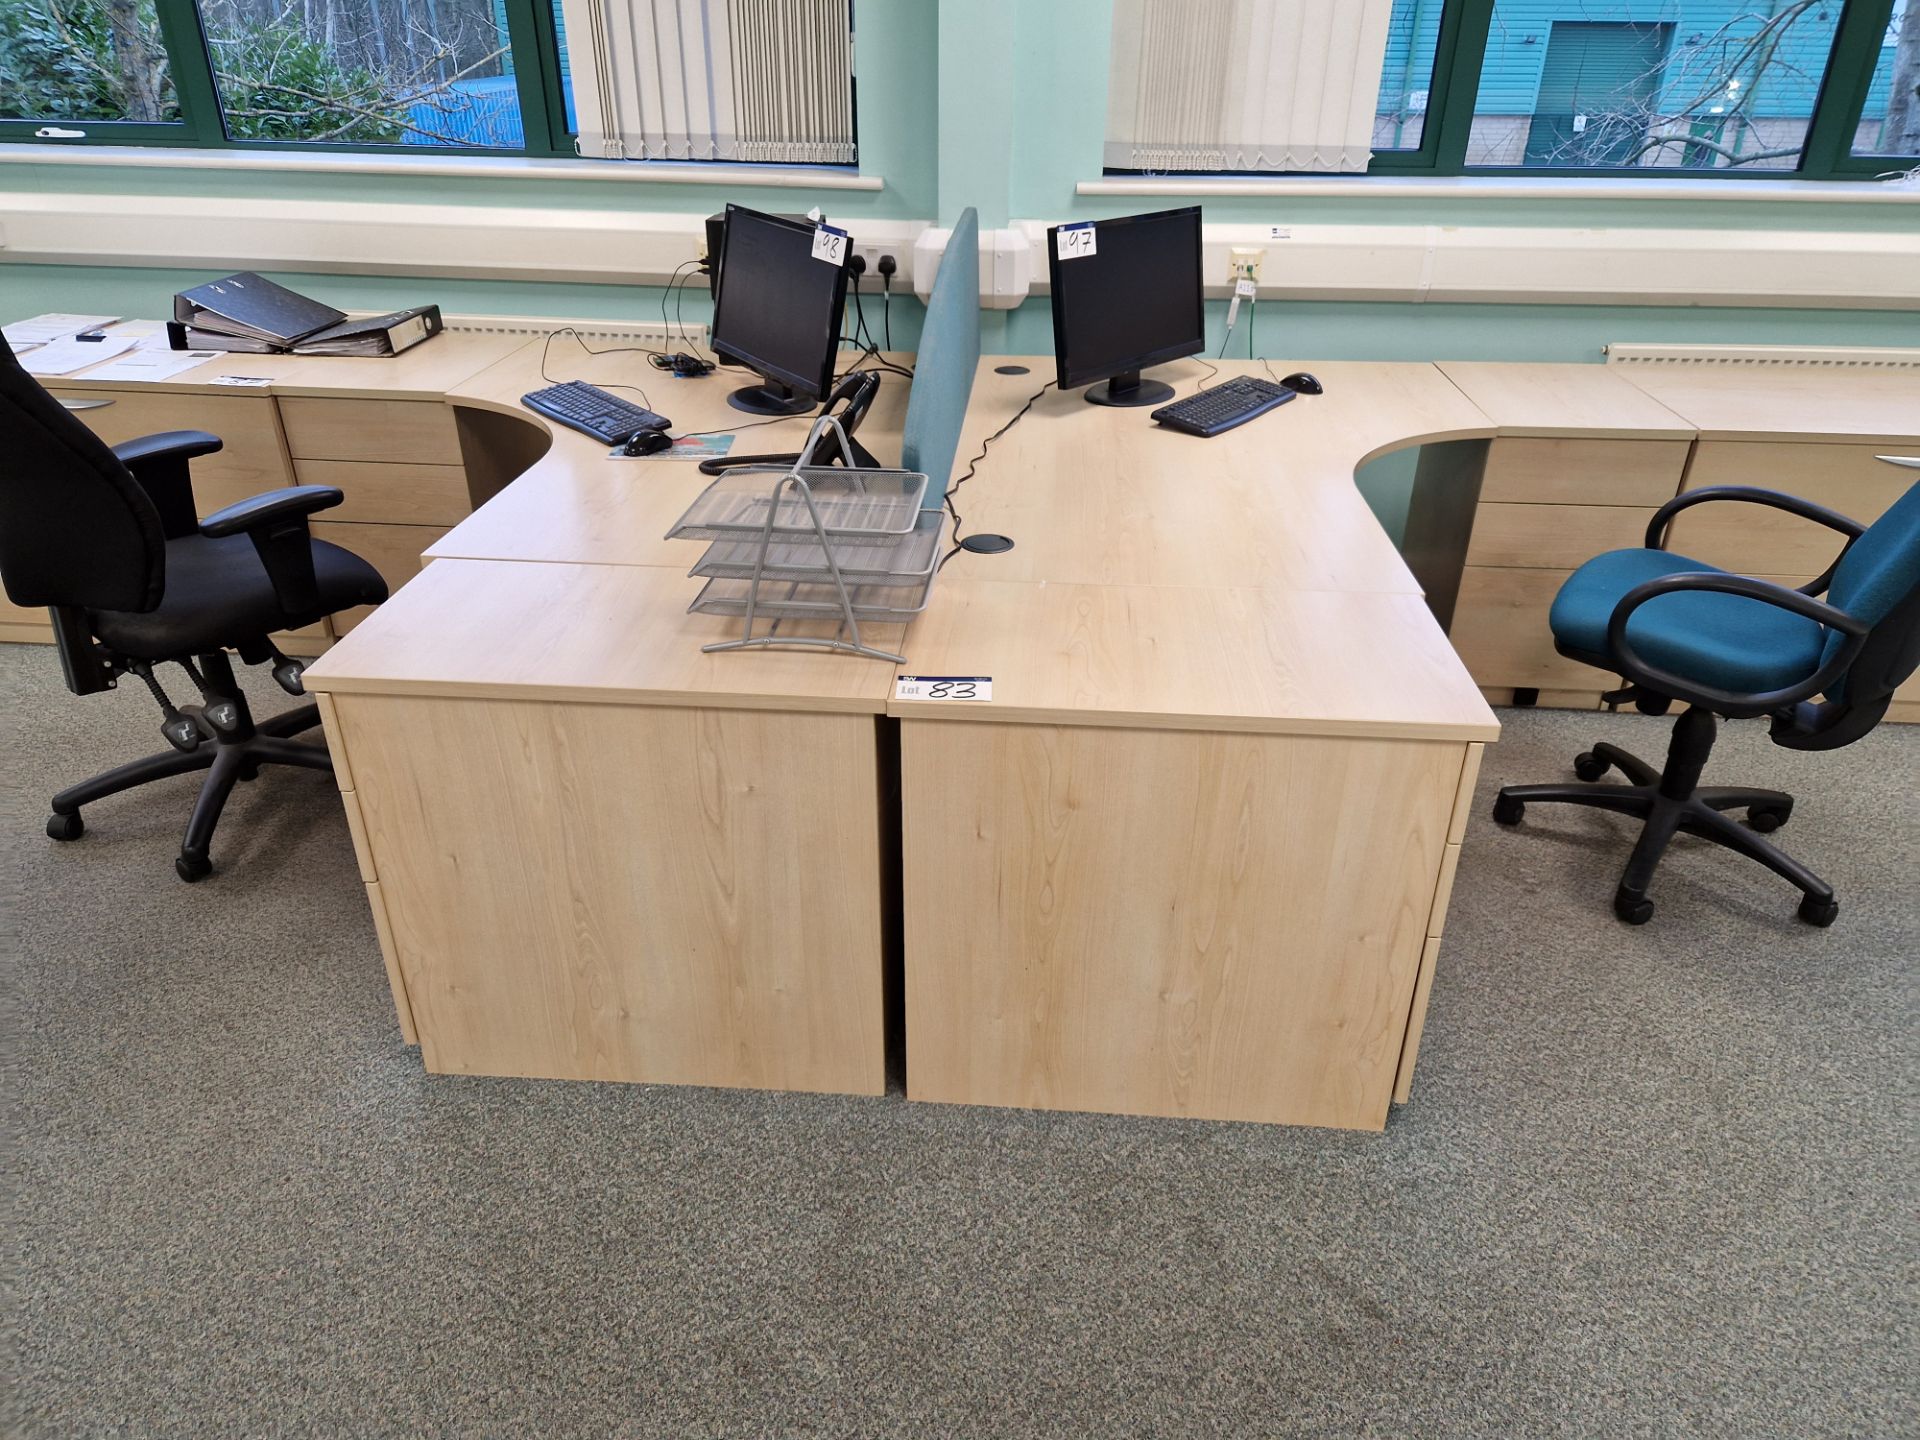 Two Light Oak Veneered Curved Desks, Four 3 Drawer Pedestals, Fabric Divider and Two Office Swivel